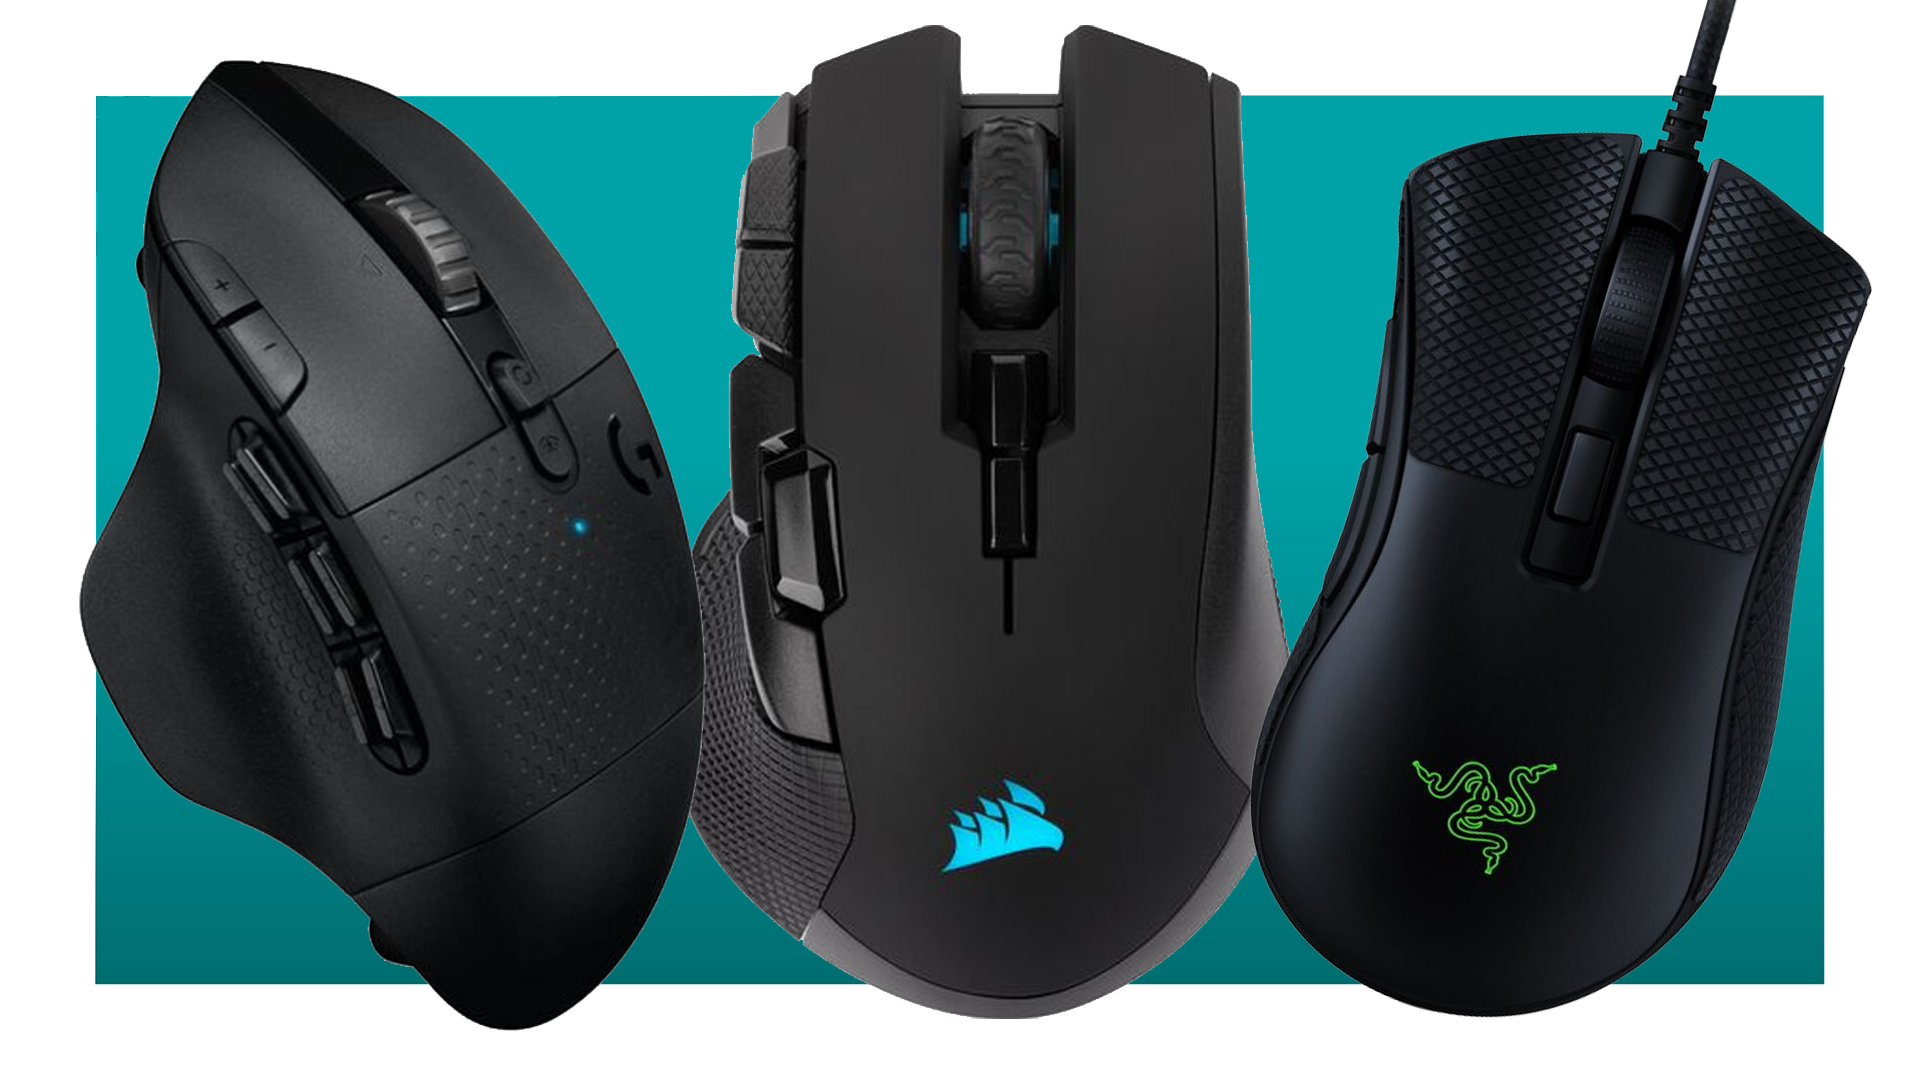  Take 30% off already discounted gaming mice during this last-minute Currys flash sale 